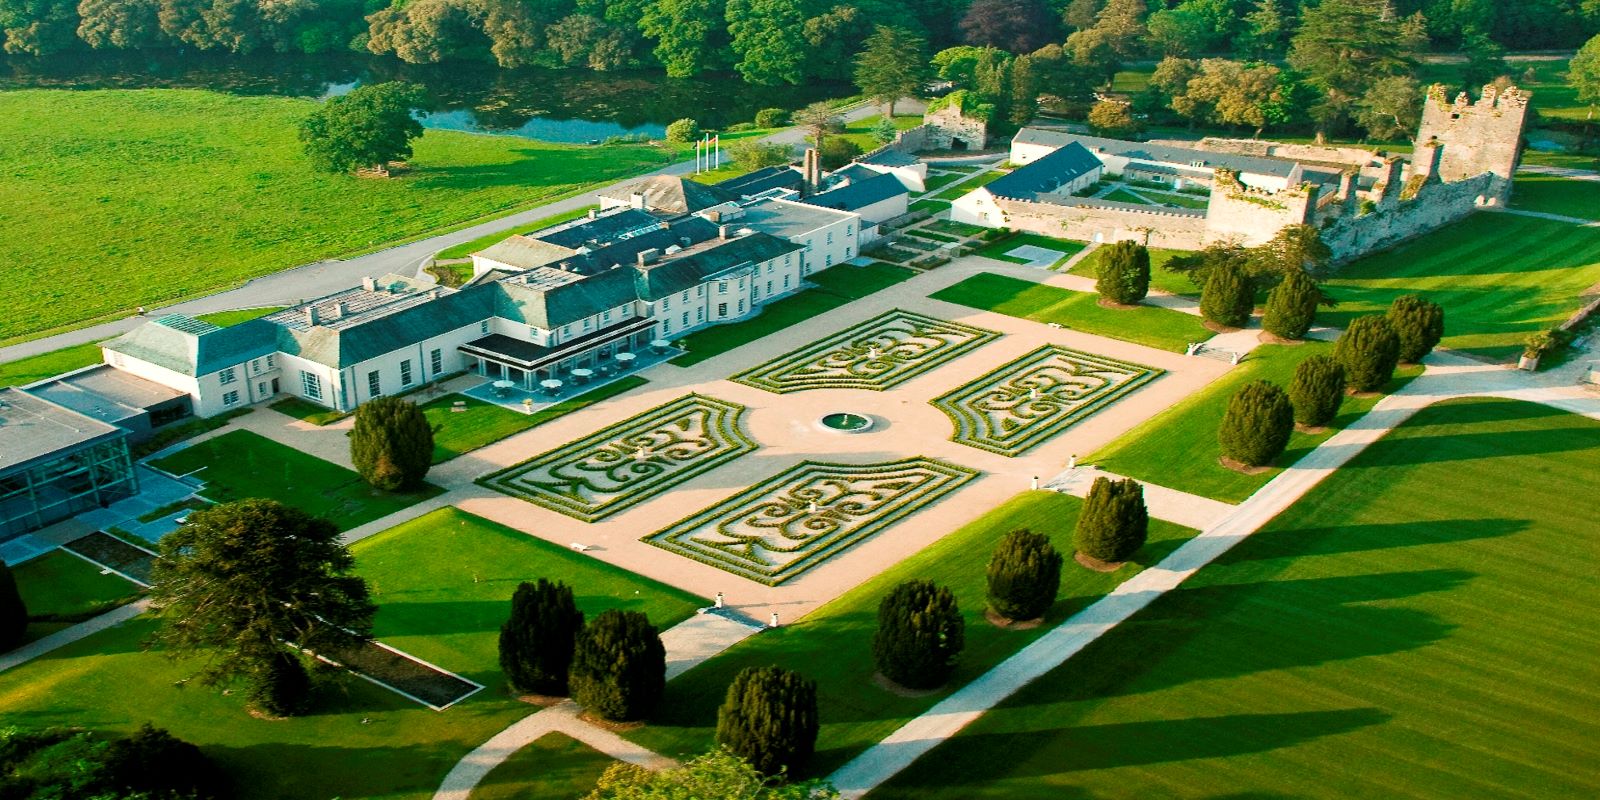 Explore the 220 acres Castlemartyr Resort by foot, horse, or golfcart.